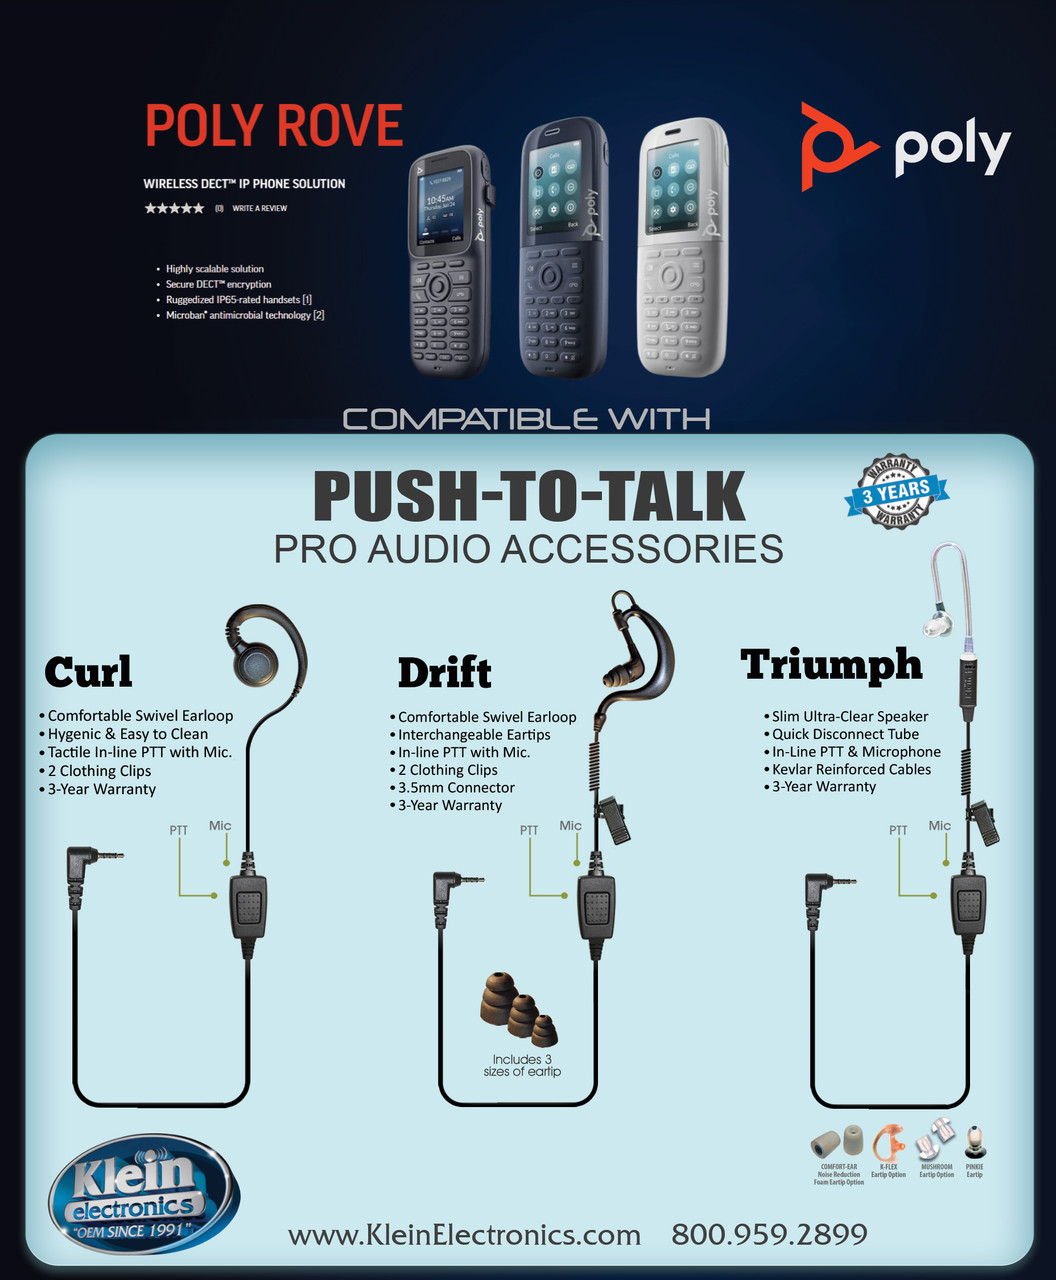 CURL 1-Wire PTT Earpiece (3.5mm connector) - Poly Rove [[product_type]] kleinelectronics.com 54.95